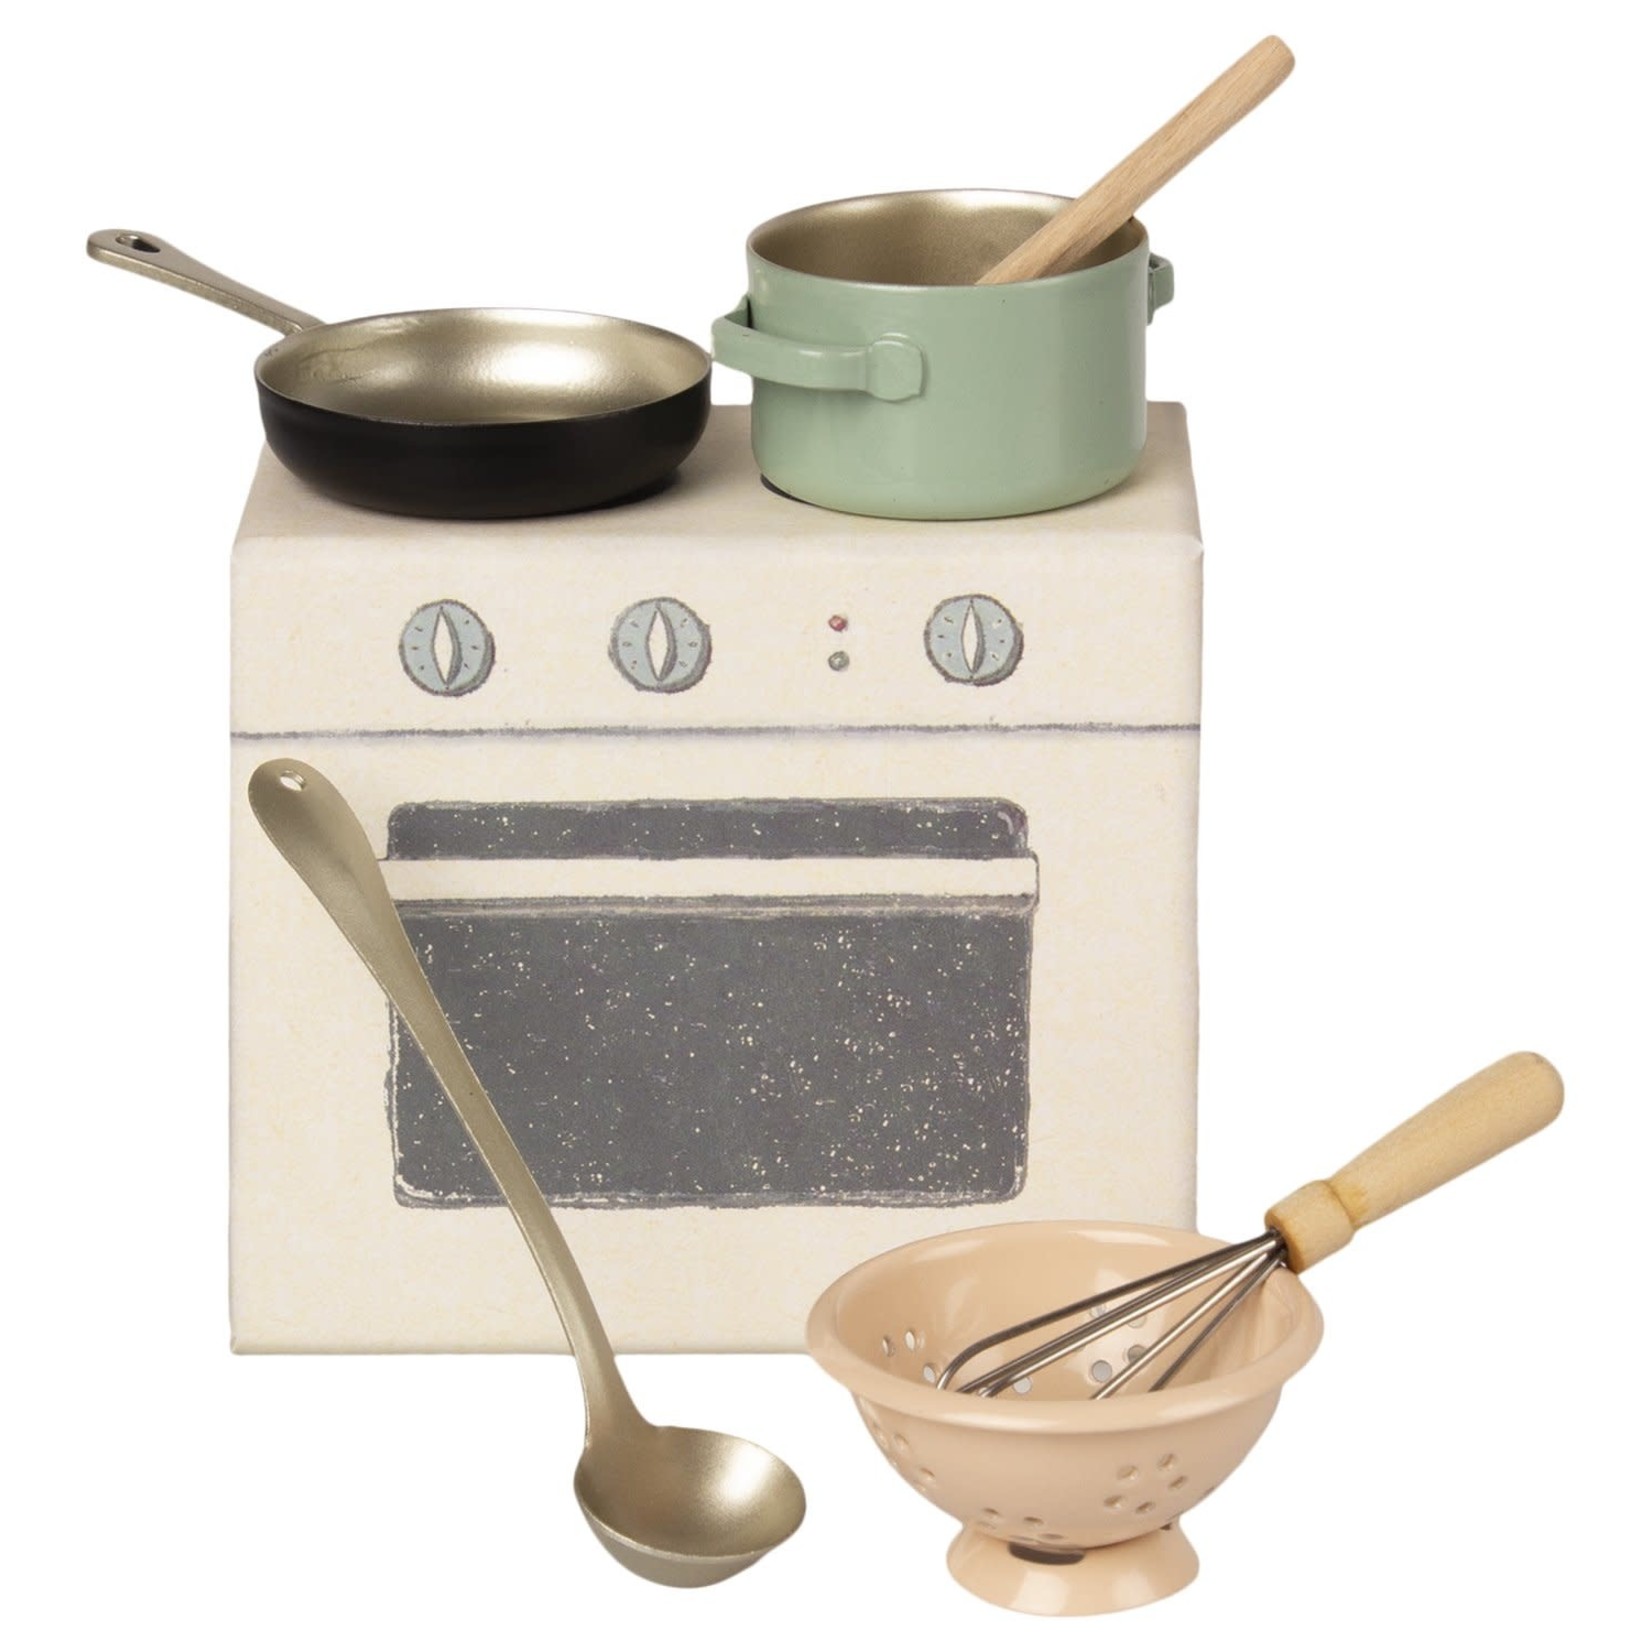 Maileg Cooking Set for Maileg Mice